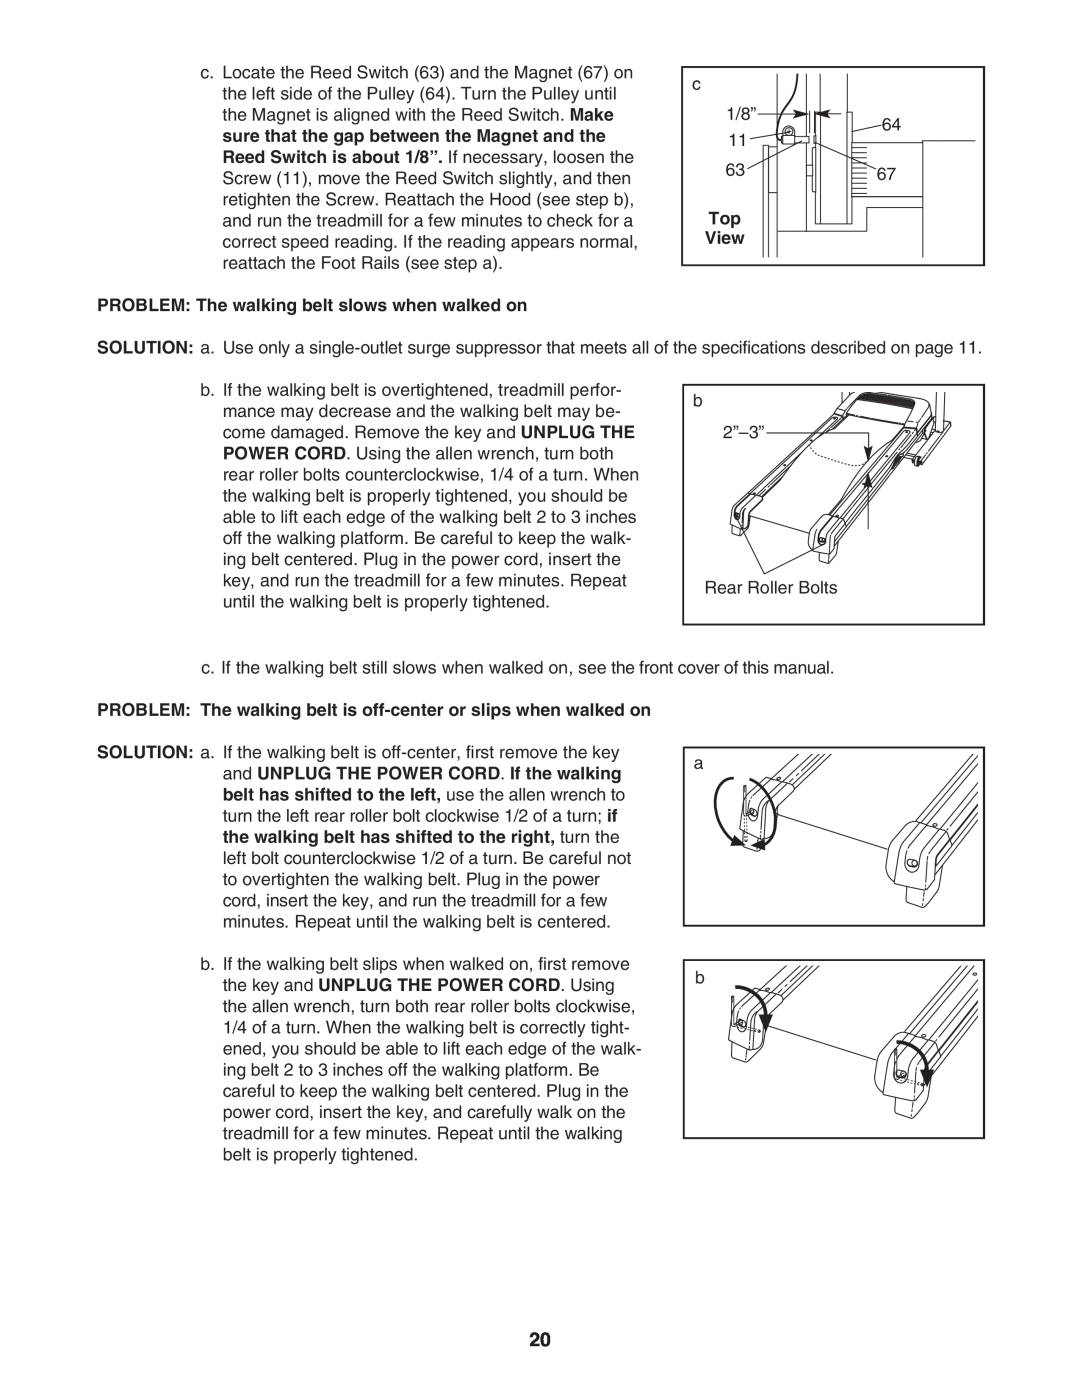 Image IMTL49105.0 user manual PROBLEM The walking belt slows when walked on 